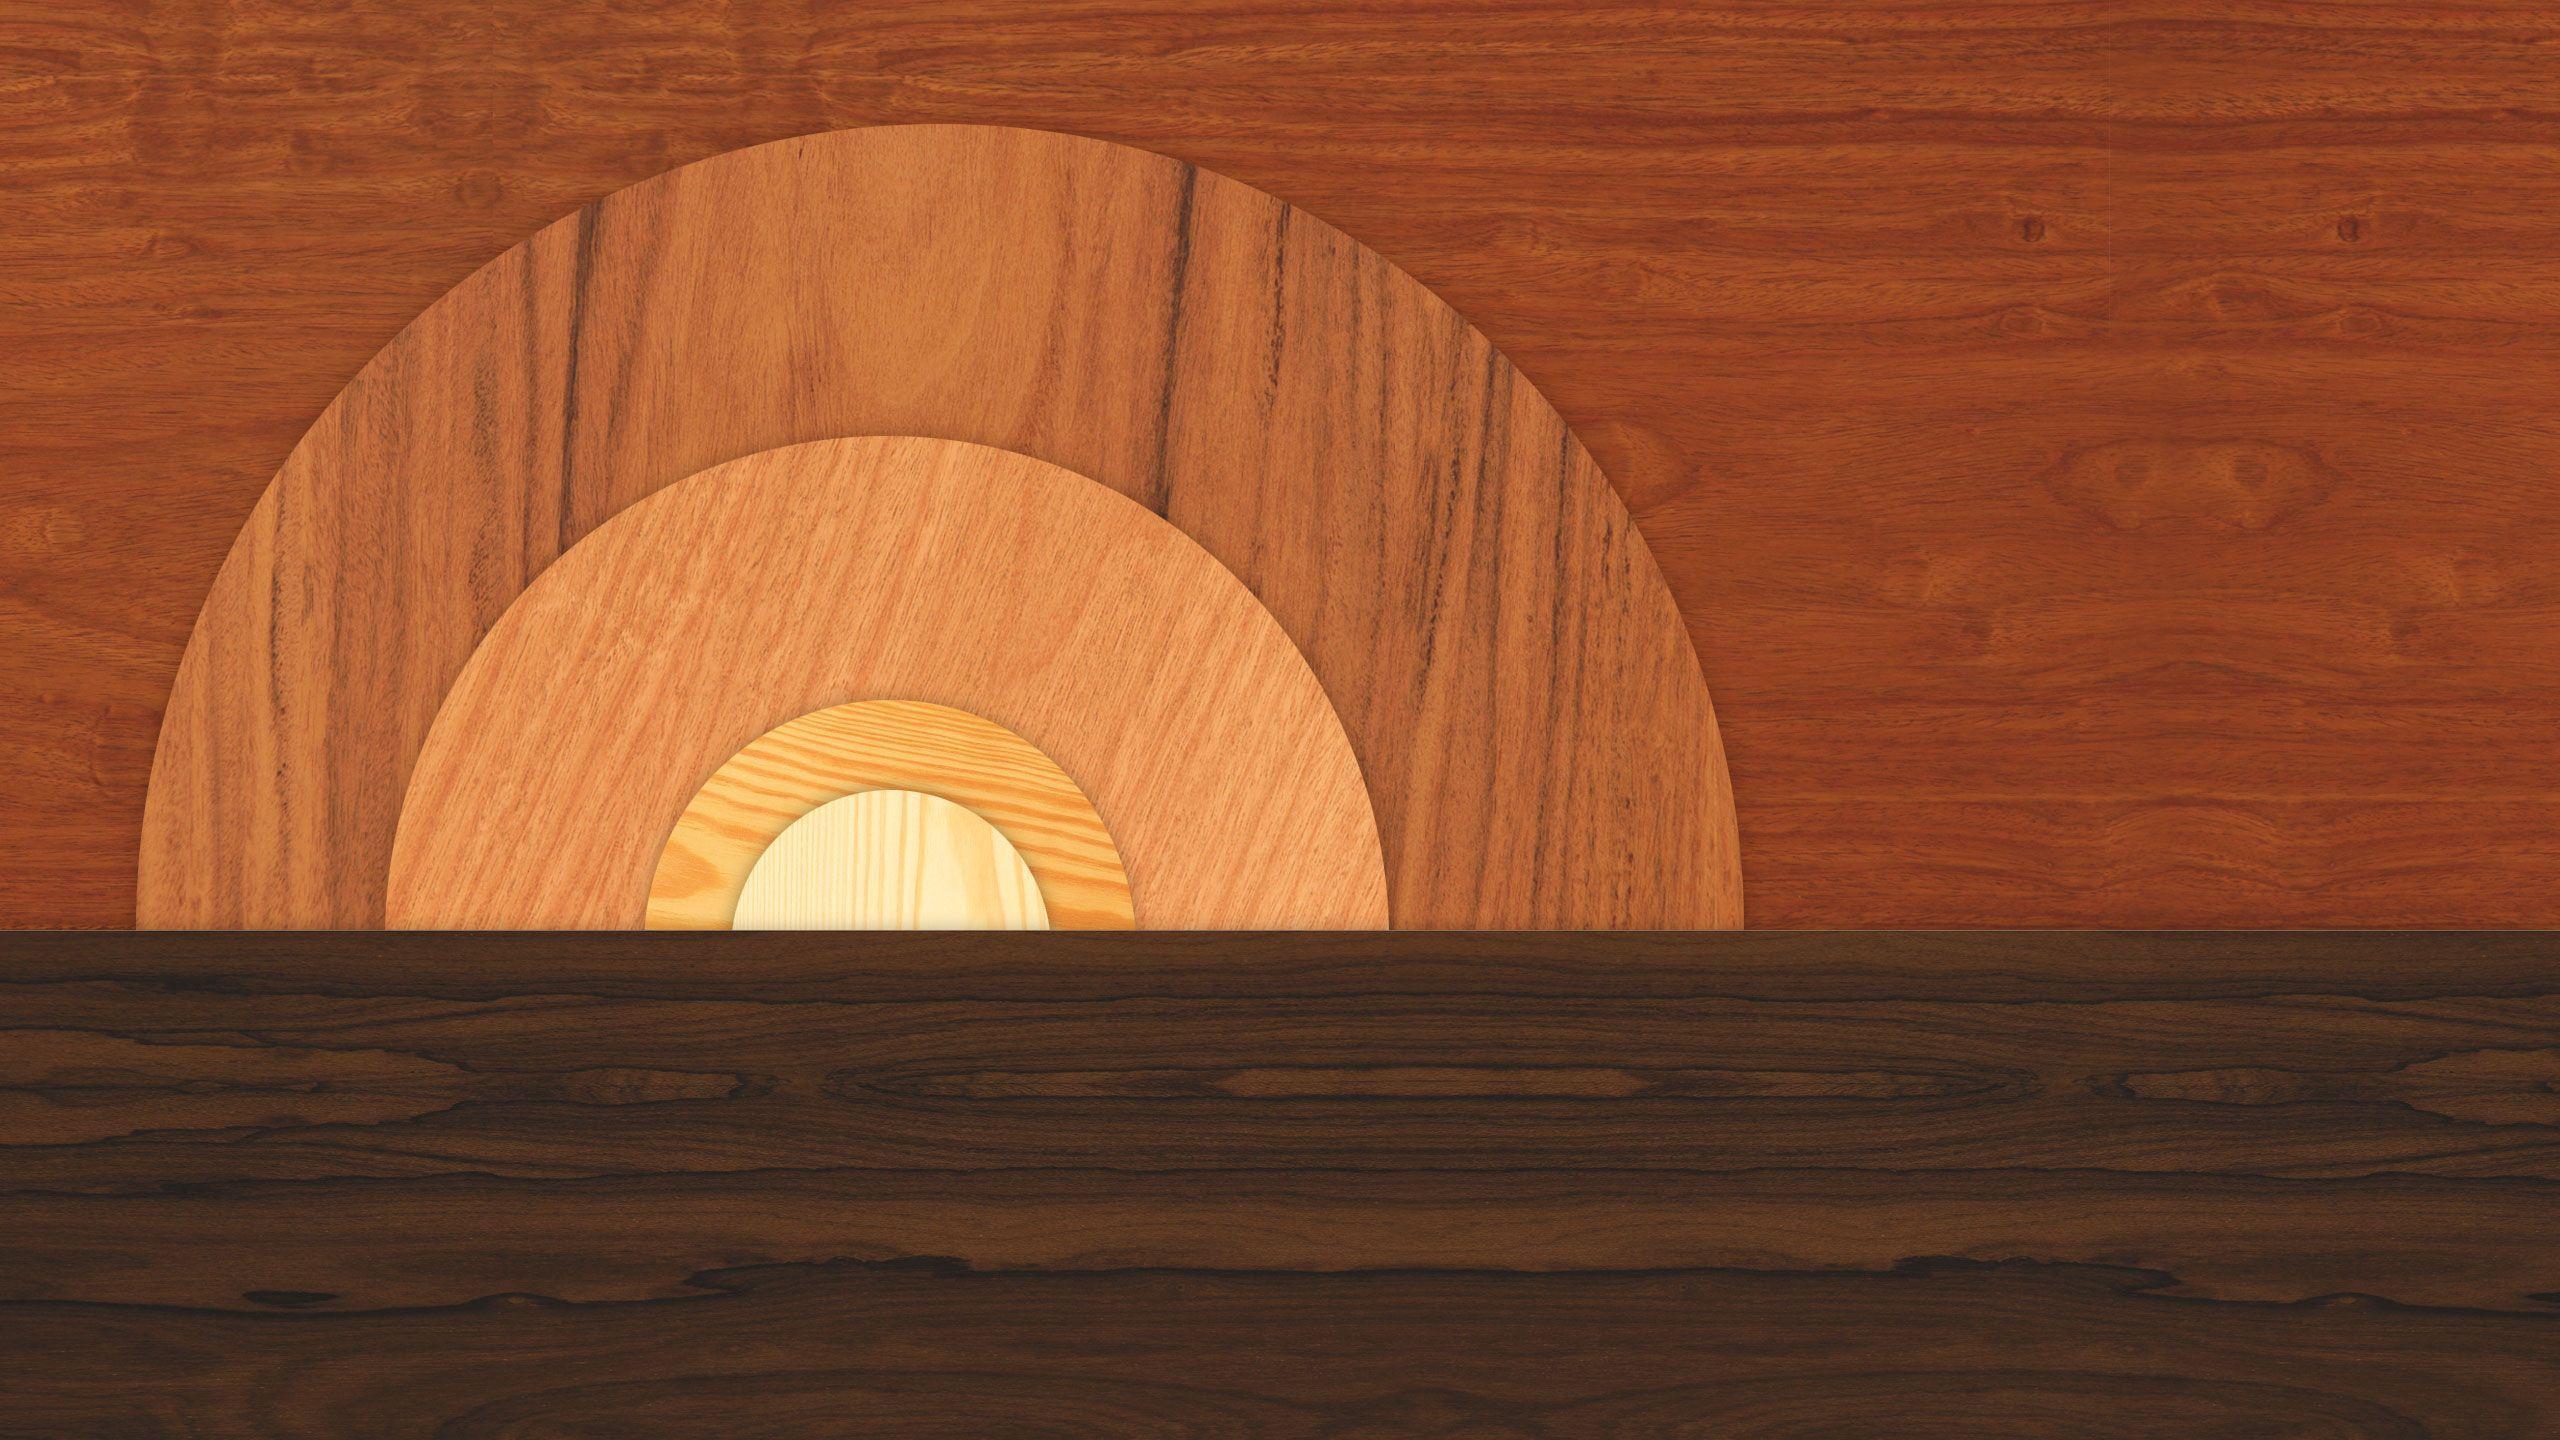 Give Your Desktop a Wooden Finish with These Wallpaper